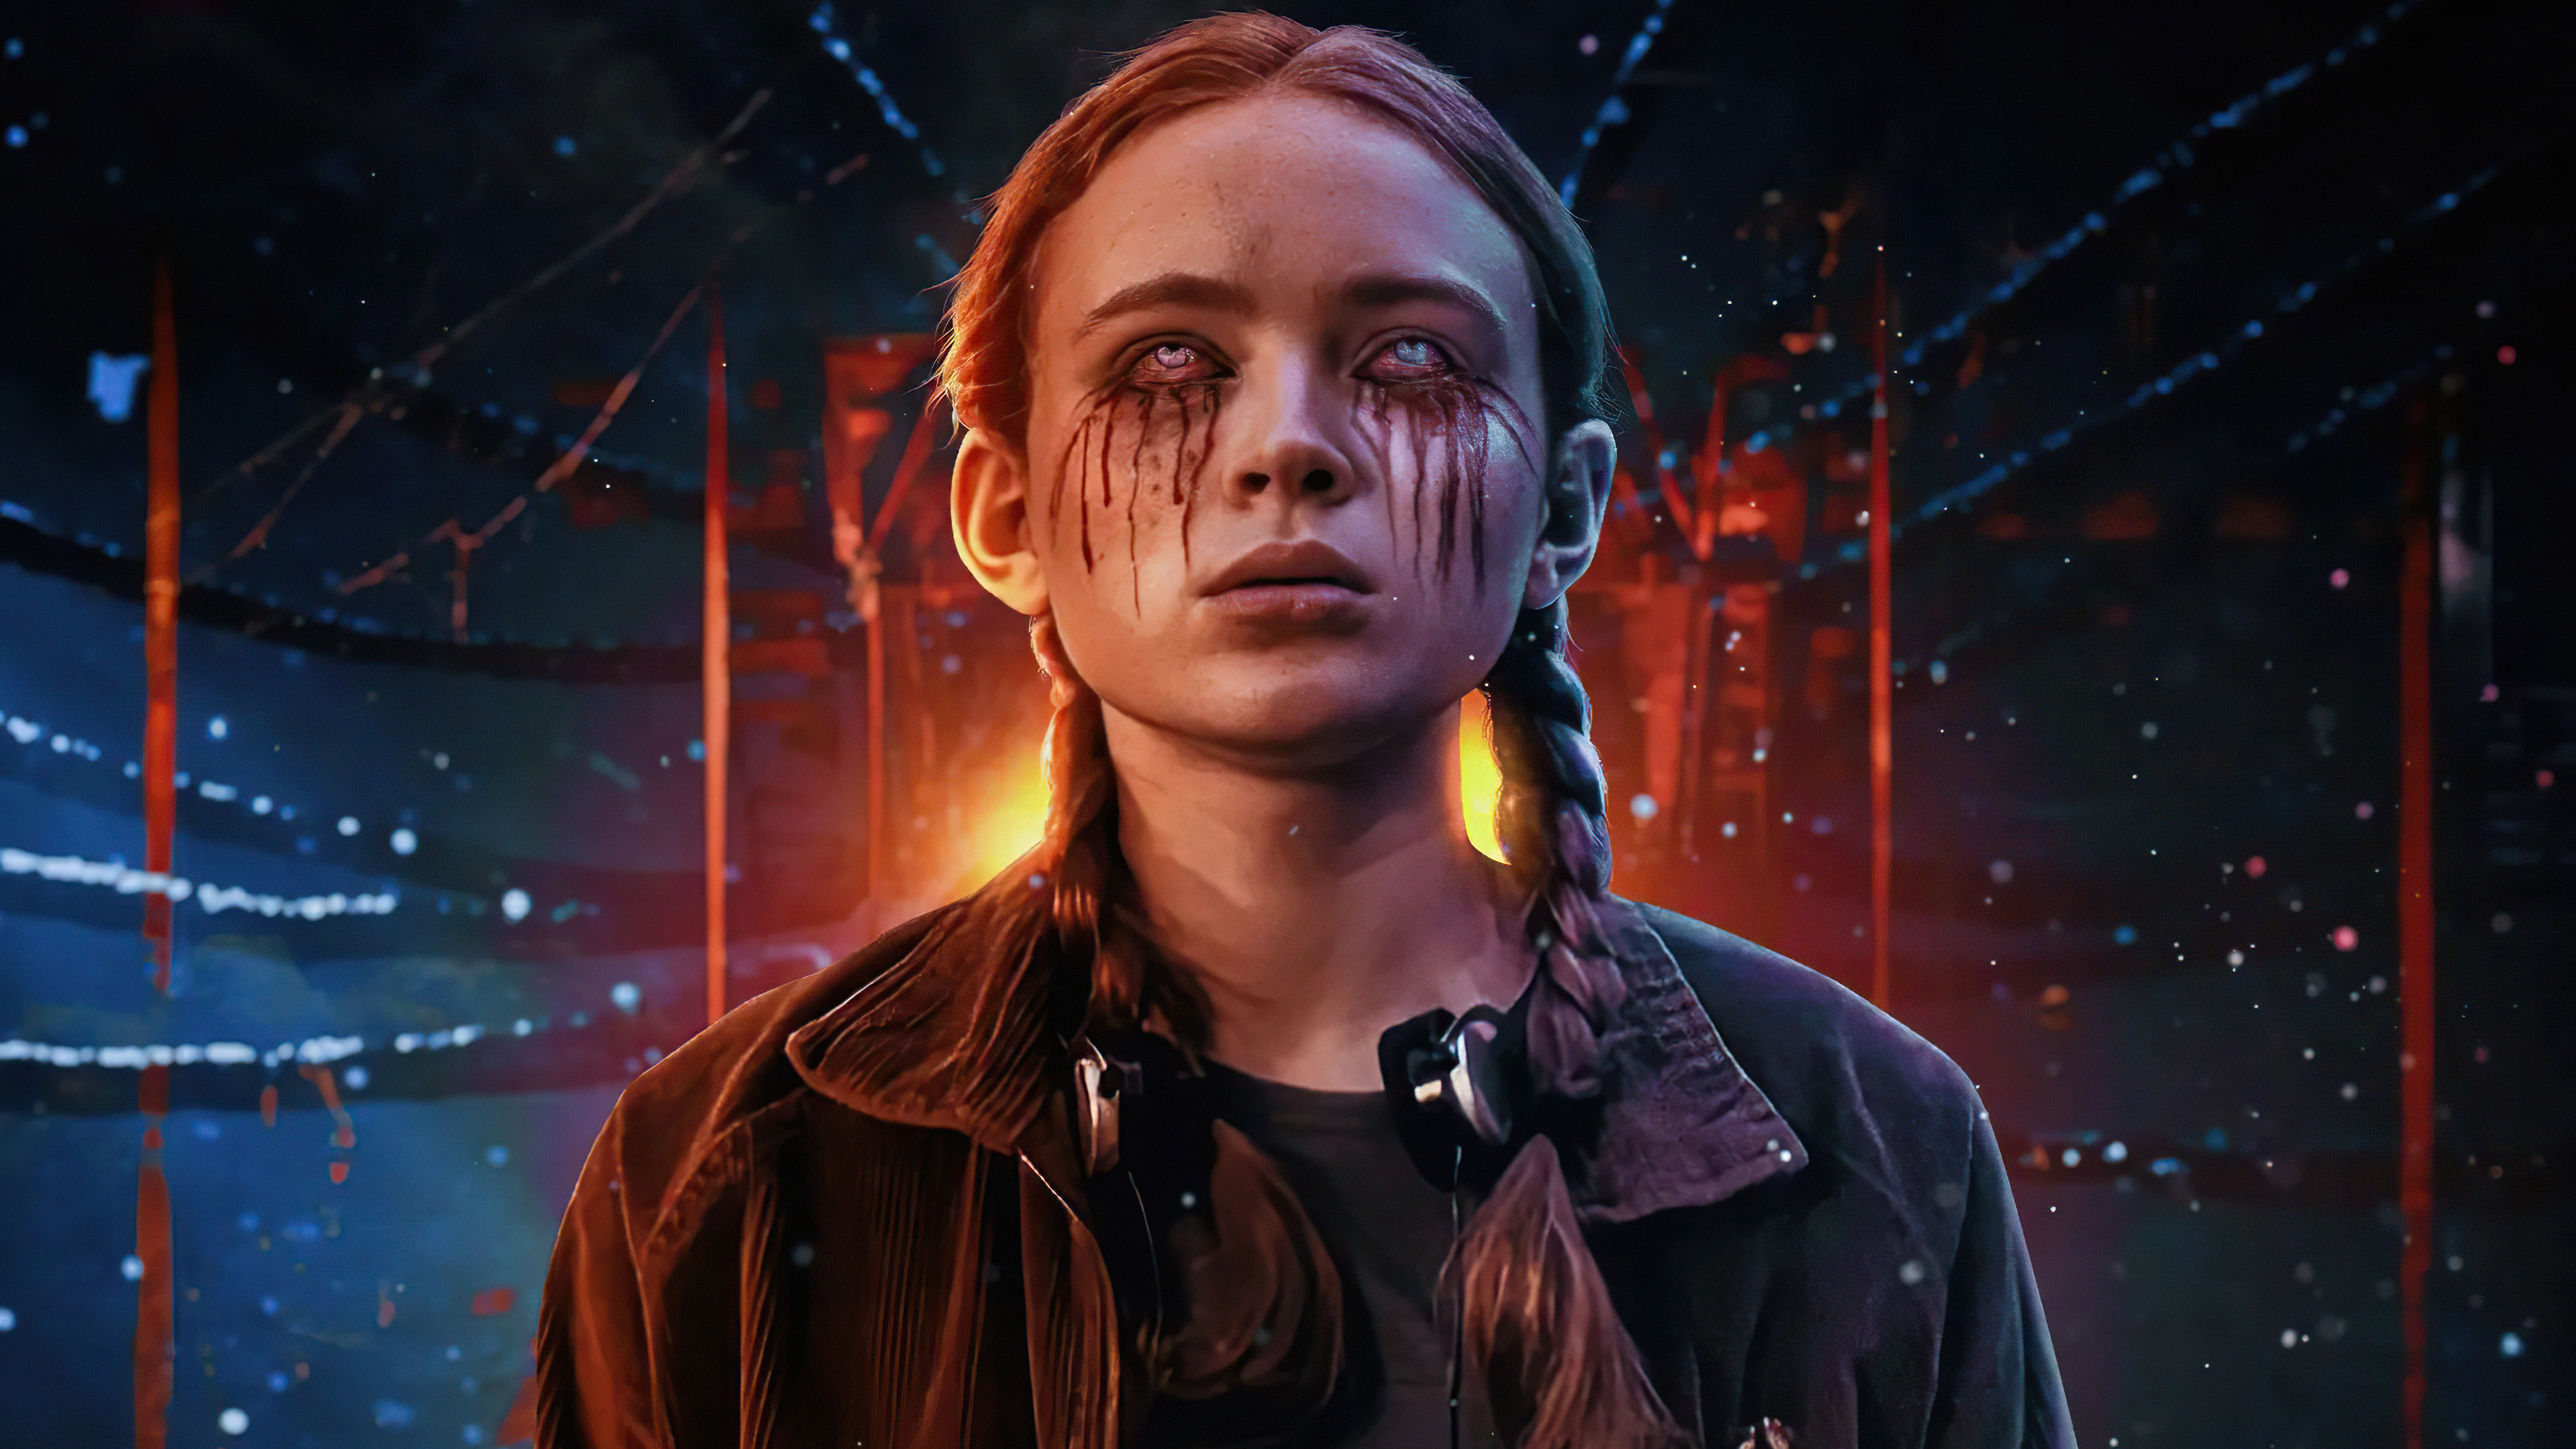 Max Mayfield Art Stranger Things Wallpaper, HD TV Series 4K Wallpapers,  Images and Background - Wallpapers Den